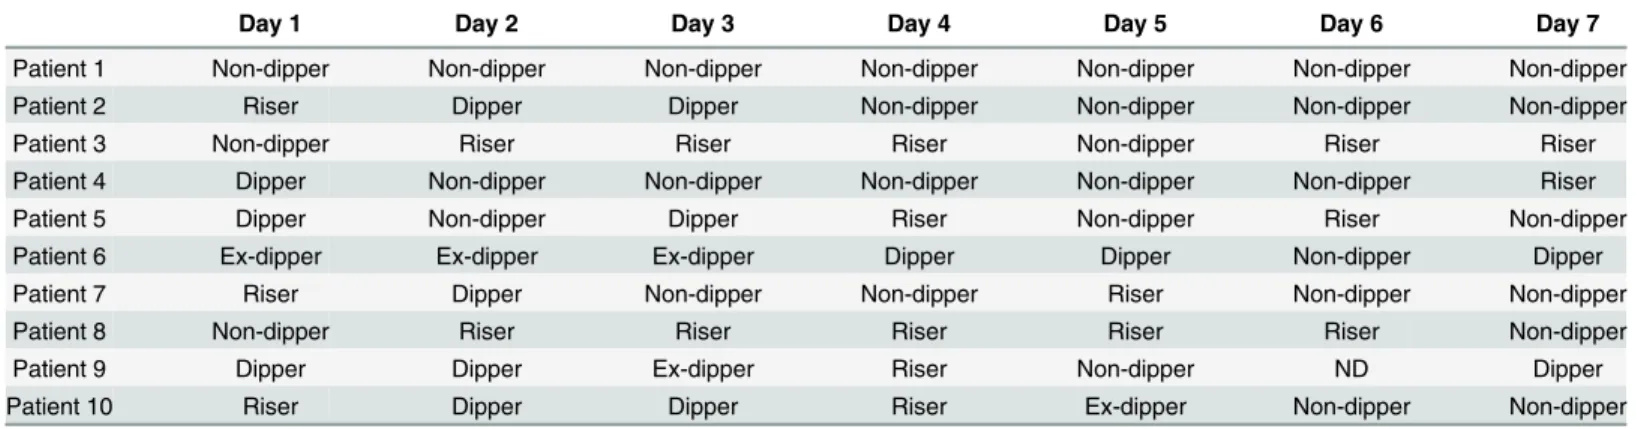 Table 4. Day-by-day change in nocturnal/diurnal systolic blood pressure ratio.